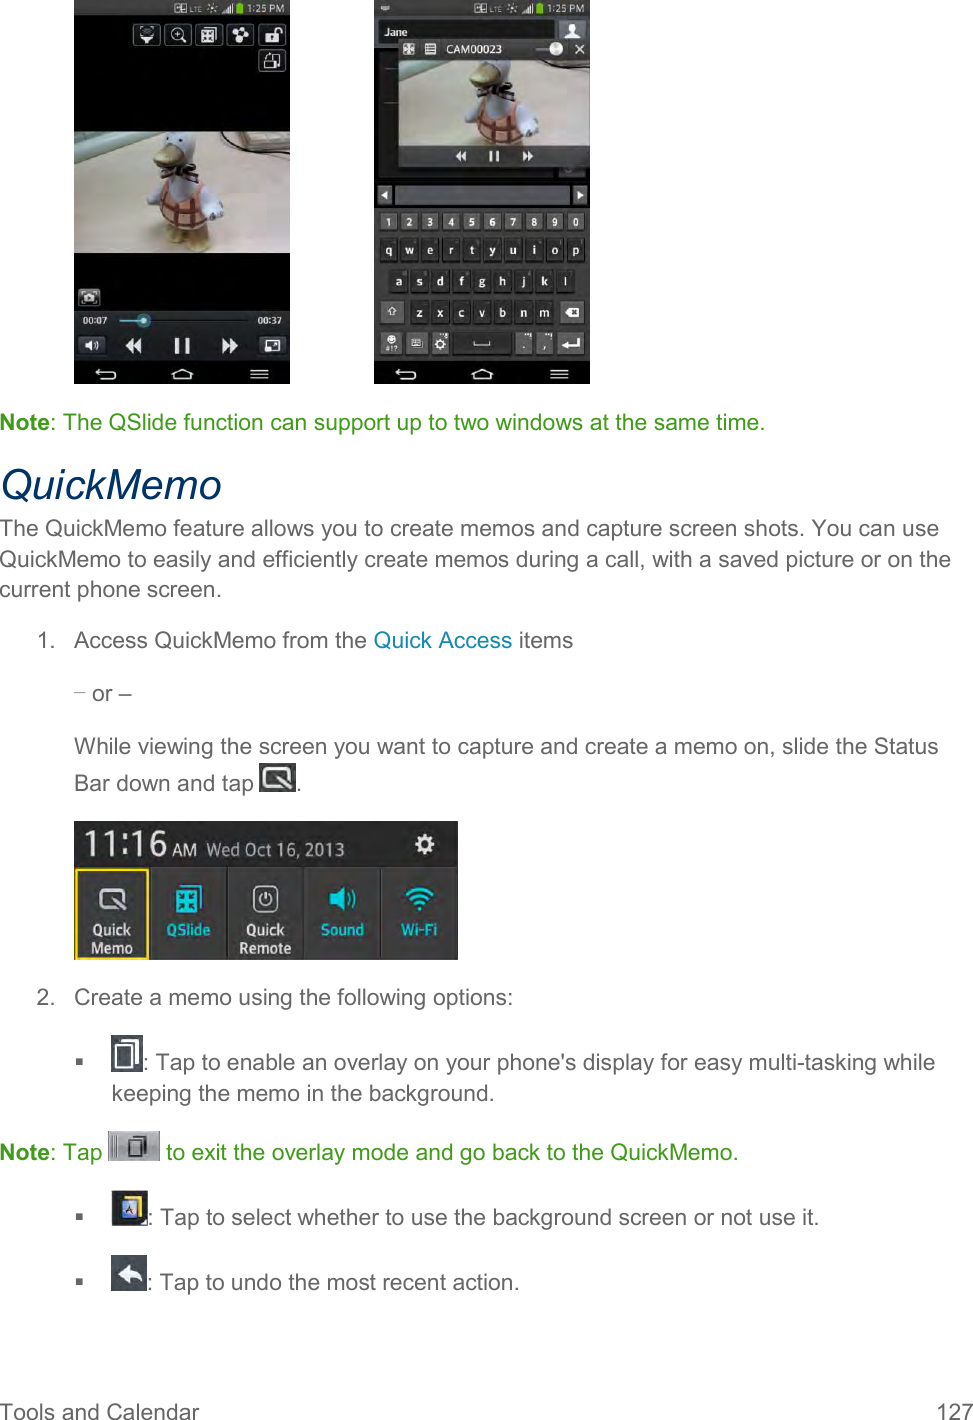 Tools and Calendar  127     Note: The QSlide function can support up to two windows at the same time. QuickMemo The QuickMemo feature allows you to create memos and capture screen shots. You can use QuickMemo to easily and efficiently create memos during a call, with a saved picture or on the current phone screen. 1.  Access QuickMemo from the Quick Access items – or – While viewing the screen you want to capture and create a memo on, slide the Status Bar down and tap  .  2.  Create a memo using the following options:   : Tap to enable an overlay on your phone&apos;s display for easy multi-tasking while keeping the memo in the background. Note: Tap   to exit the overlay mode and go back to the QuickMemo.   : Tap to select whether to use the background screen or not use it.   : Tap to undo the most recent action. 